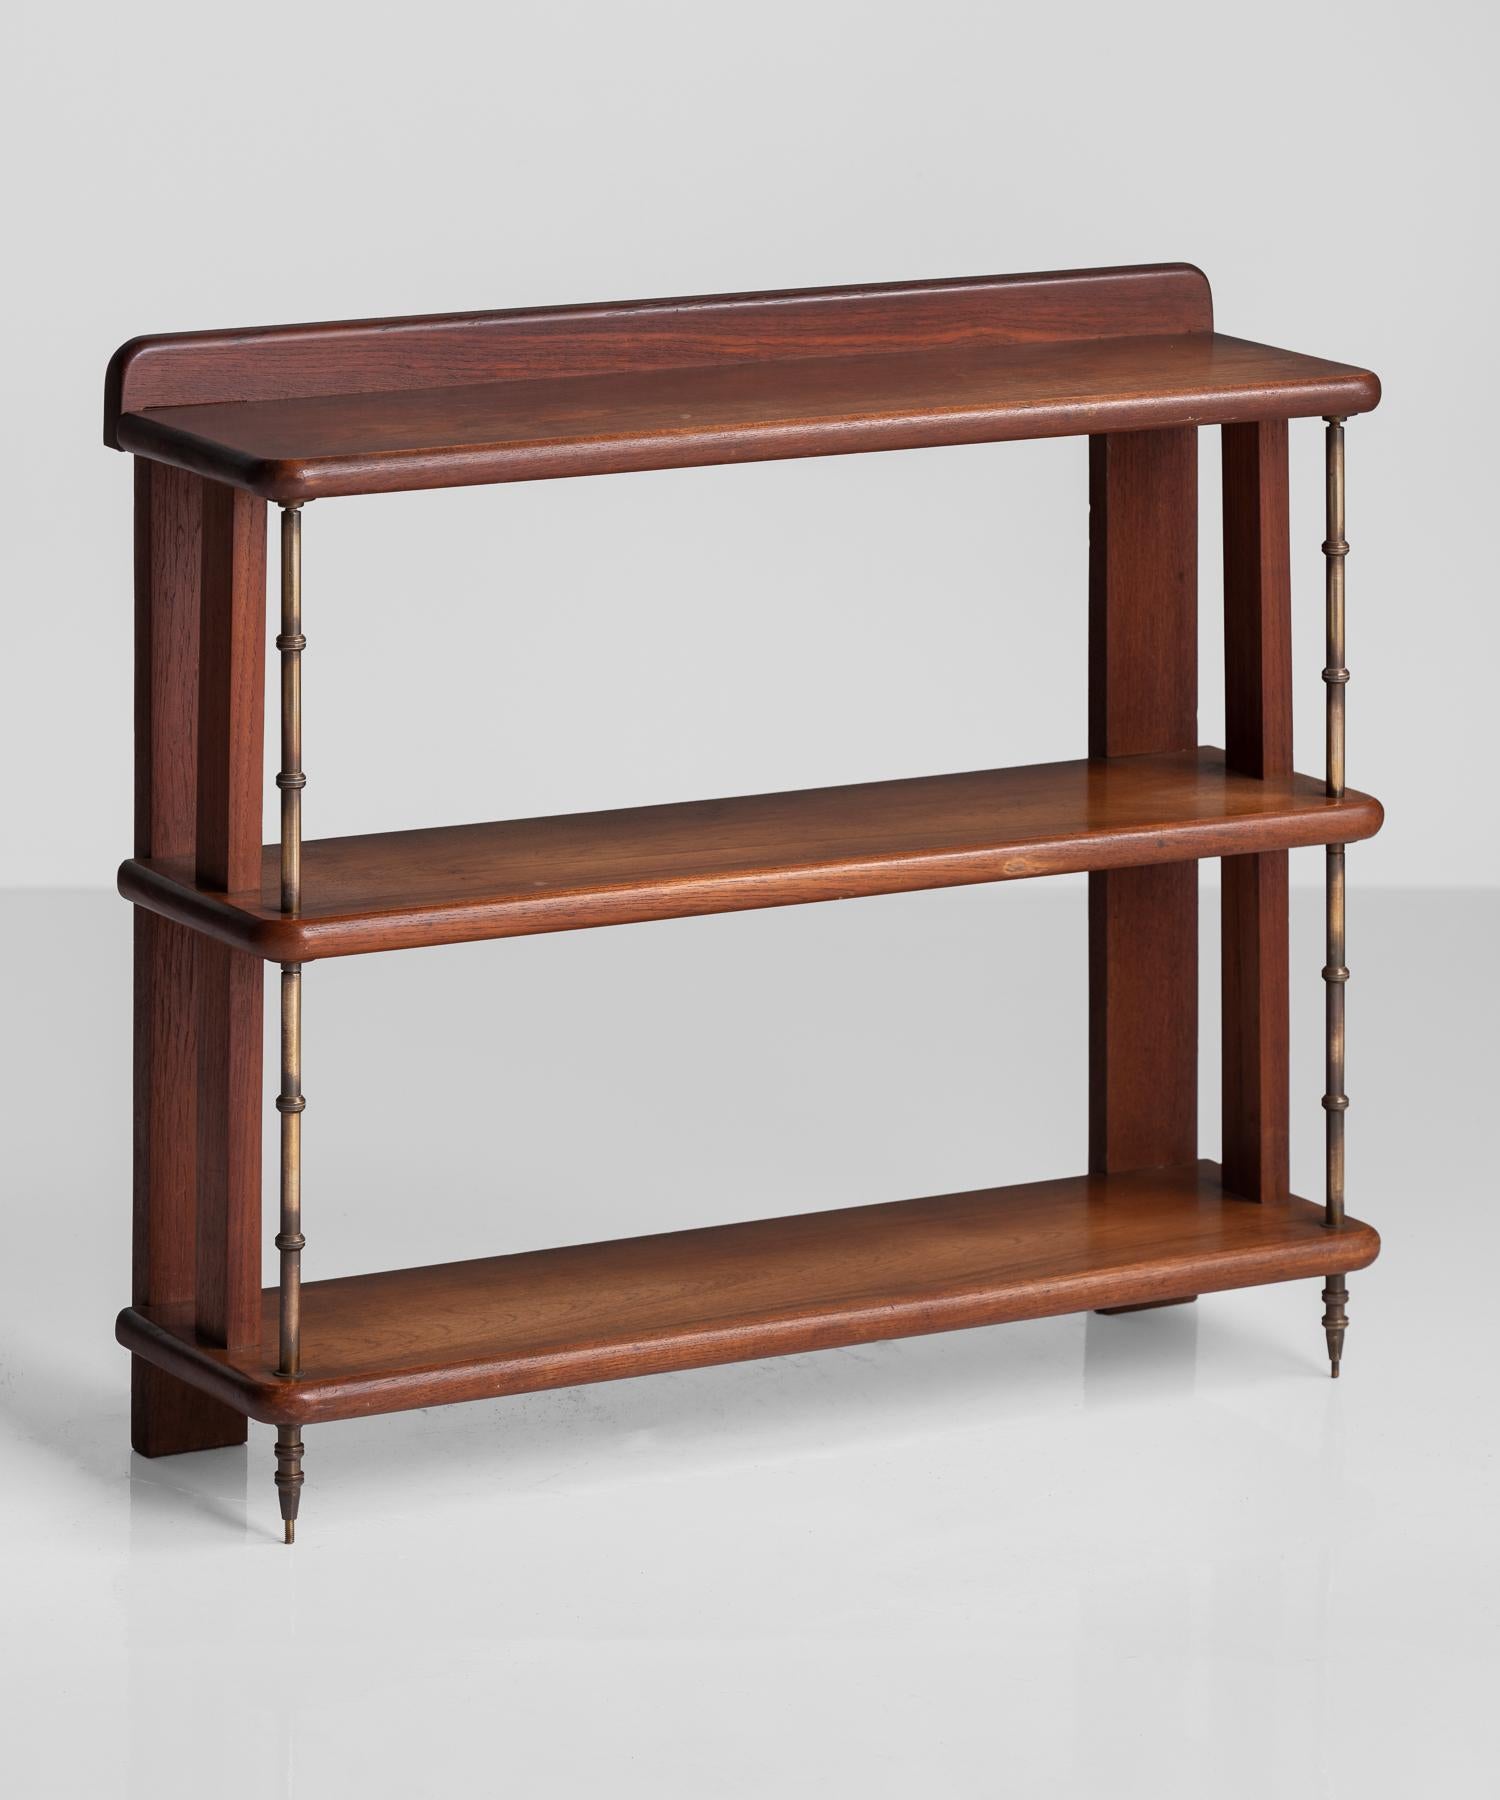 Teak and brass Campaign style Shelves, England, circa 1930.

Simple shelving in teak with rounded edges and brass arms.